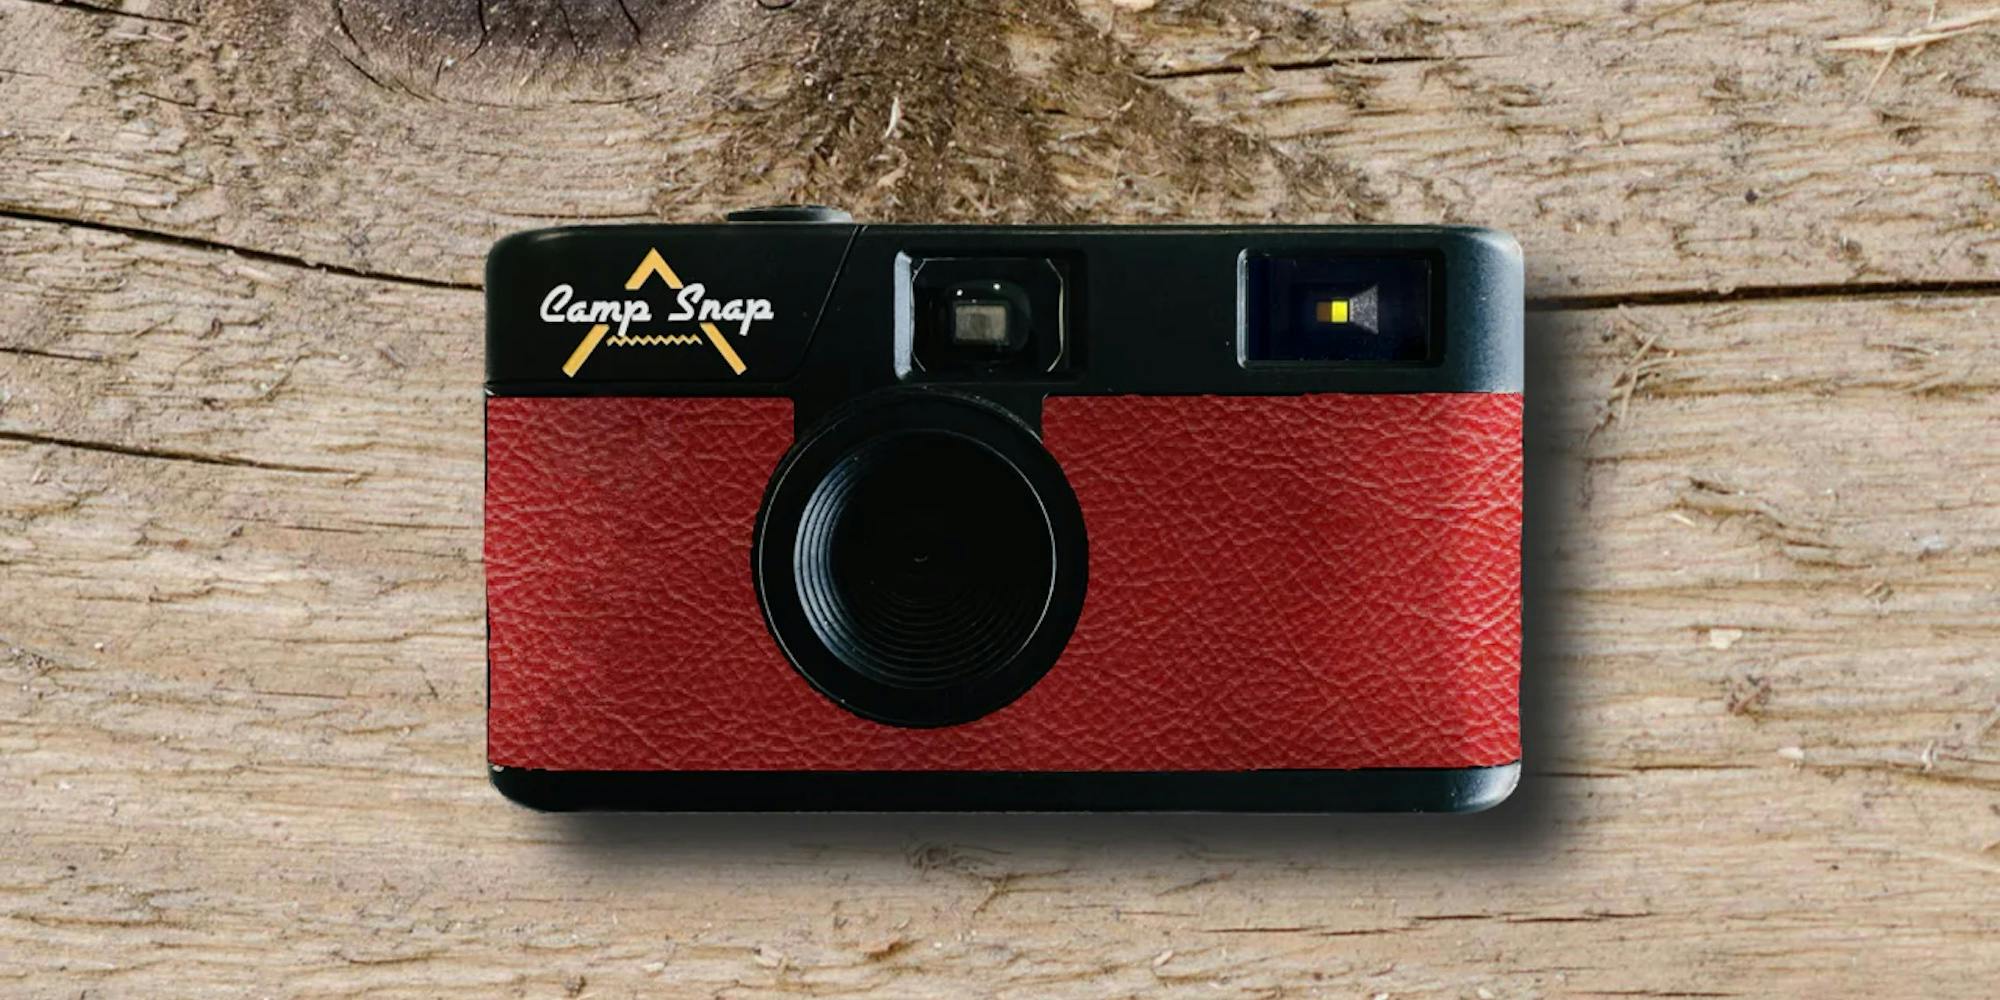 The Camp Snap Camera Was Designed For Kids But Is An Addictive Alternative For Creators Tired Of Modern Perfection